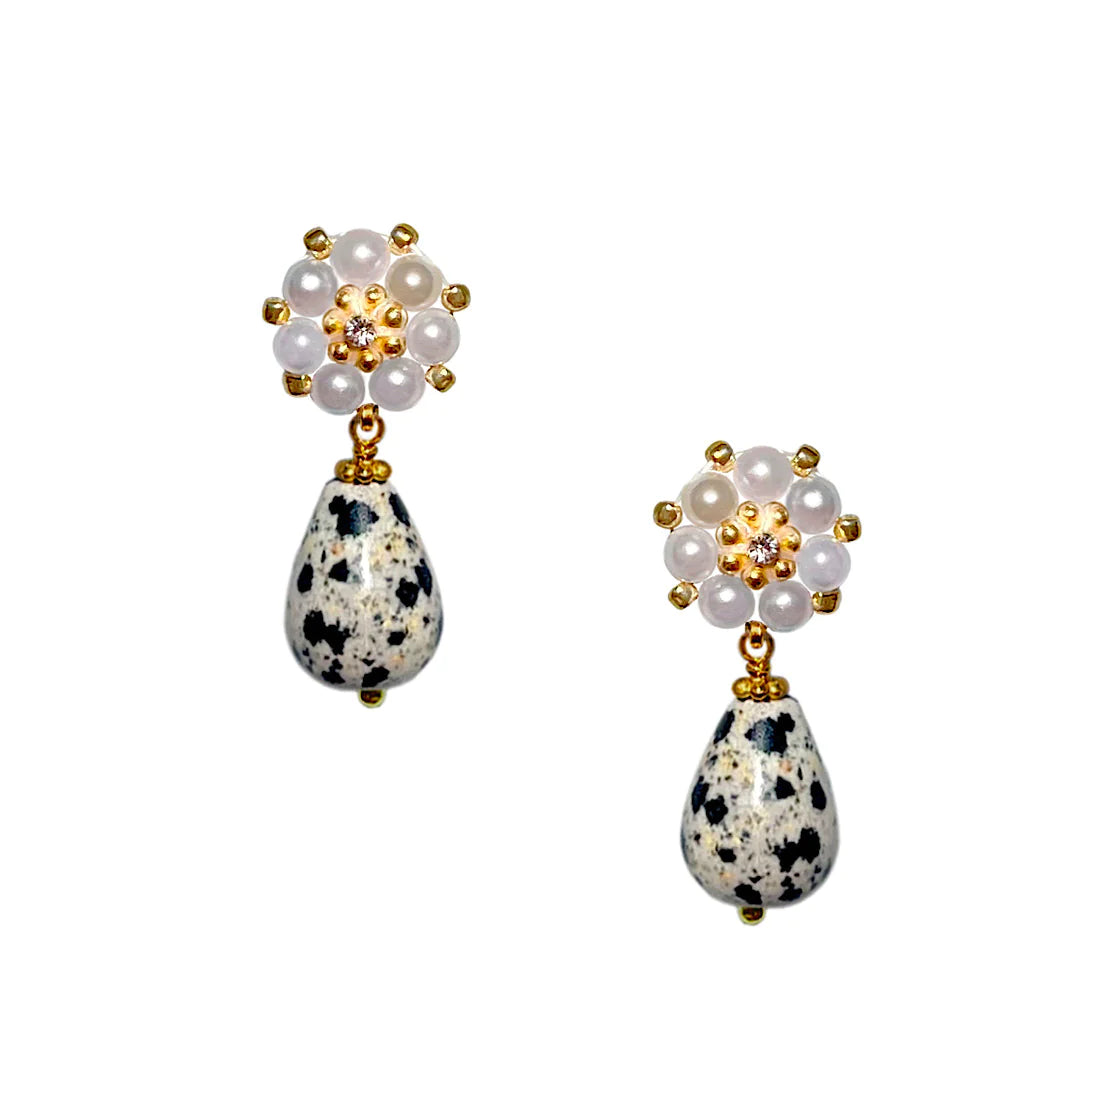 A pair of Dalmation Jasper earrings with pearls and Swarovski crystals.